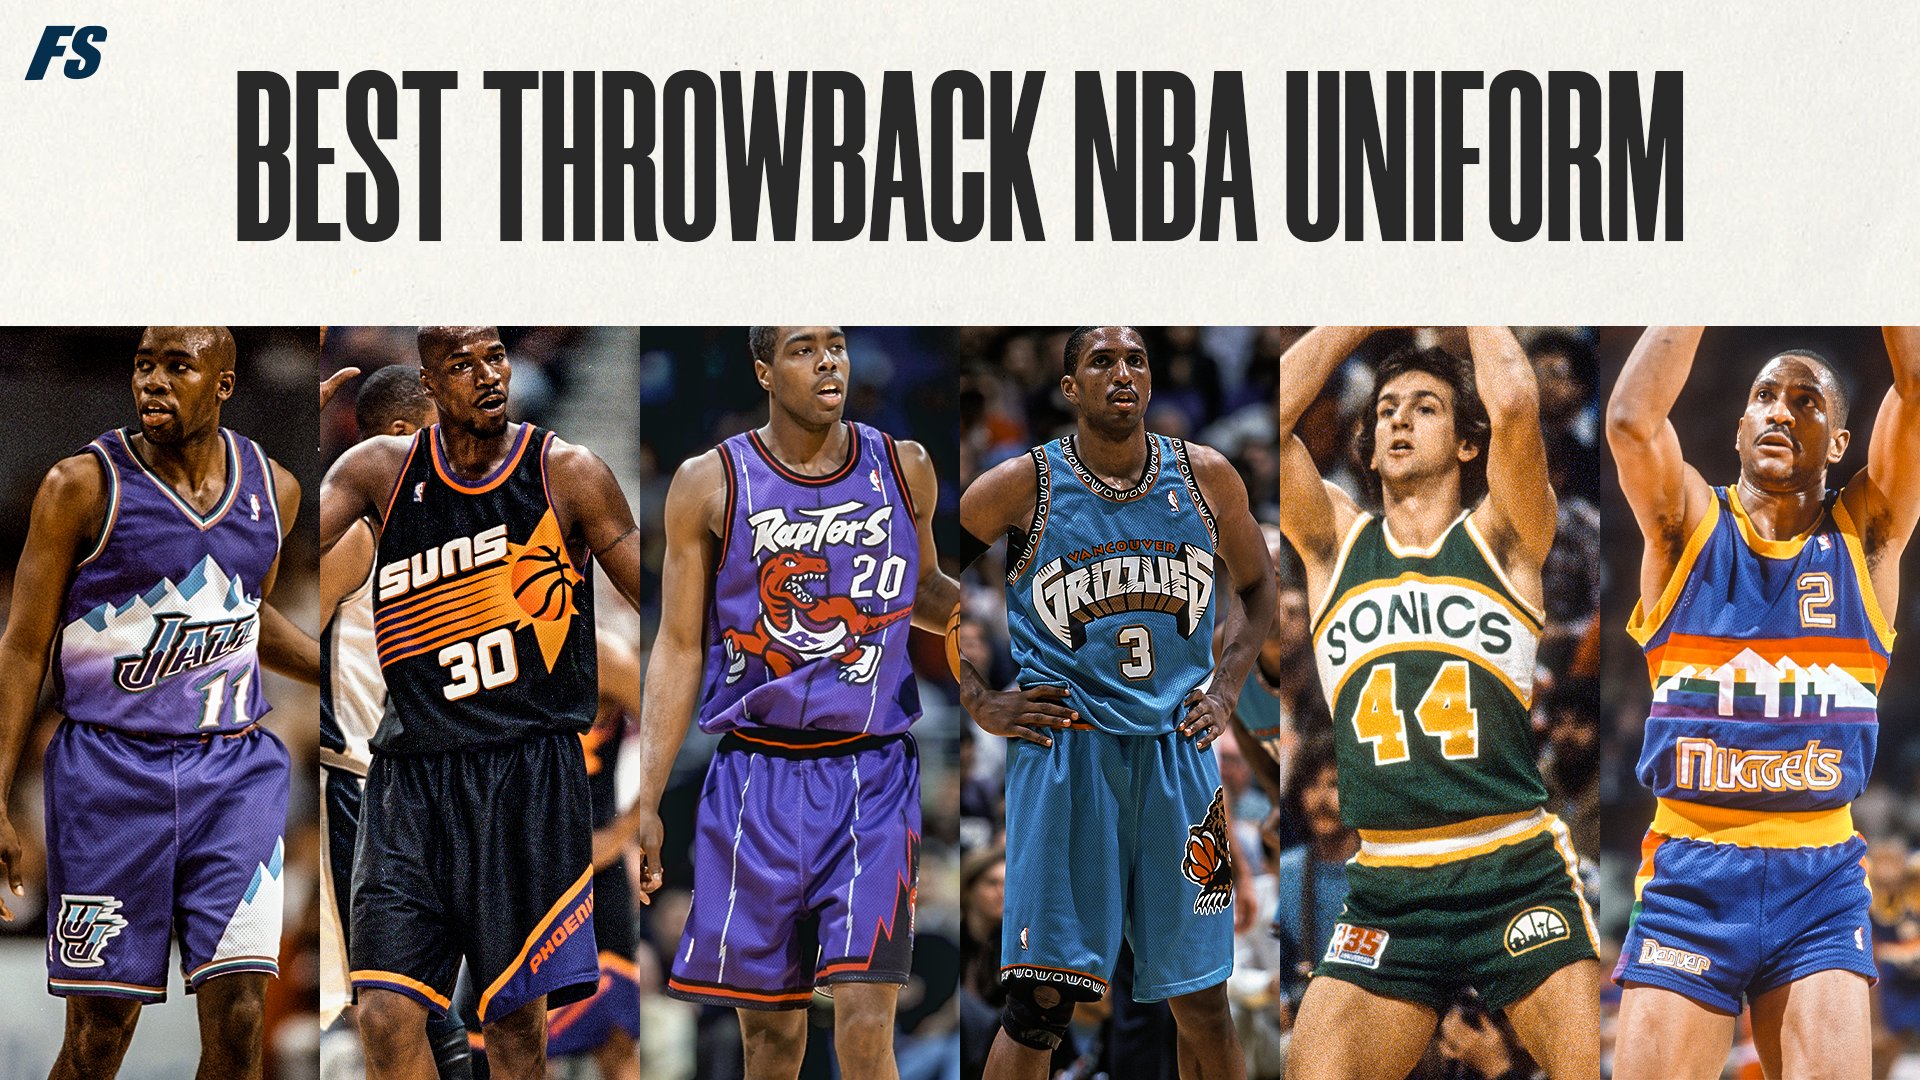 NBA on X: There's just something about those classic NBA threads 🔥 Which throwback  jersey is your favorite? Show off your favorite jerseys on Dec. 14 with the  hashtag #NBAJerseyDay to celebrate